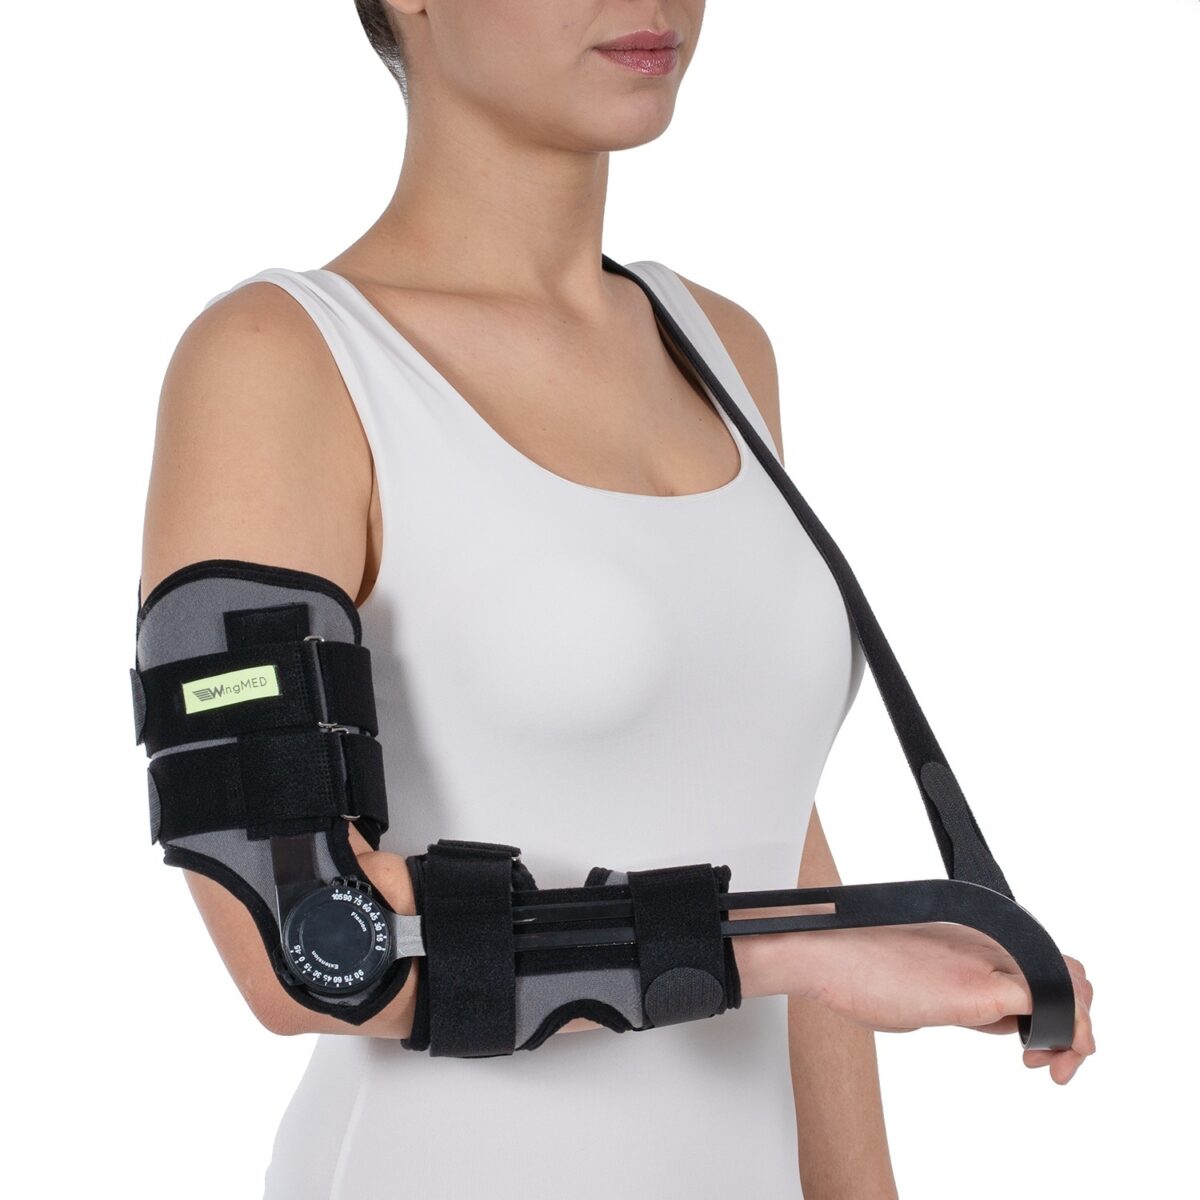 wingmed orthopedic equipments W218 adjustable elbow contracture splint with hand support 99